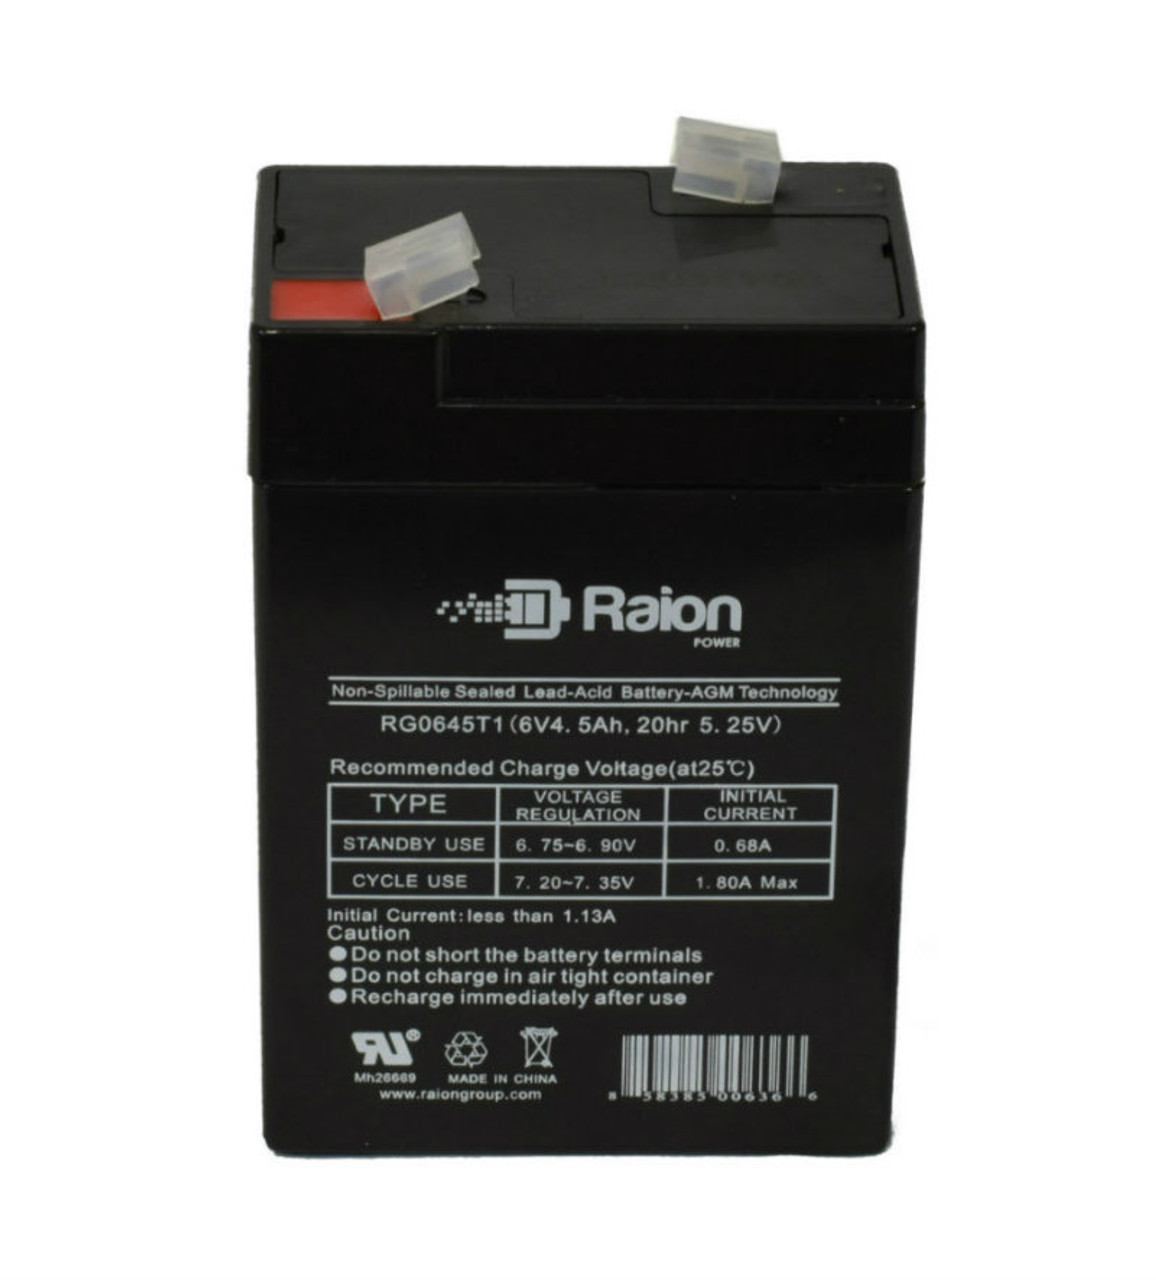 Raion Power RG0645T1 Replacement Battery Cartridge for Double Tech DB6-4.5